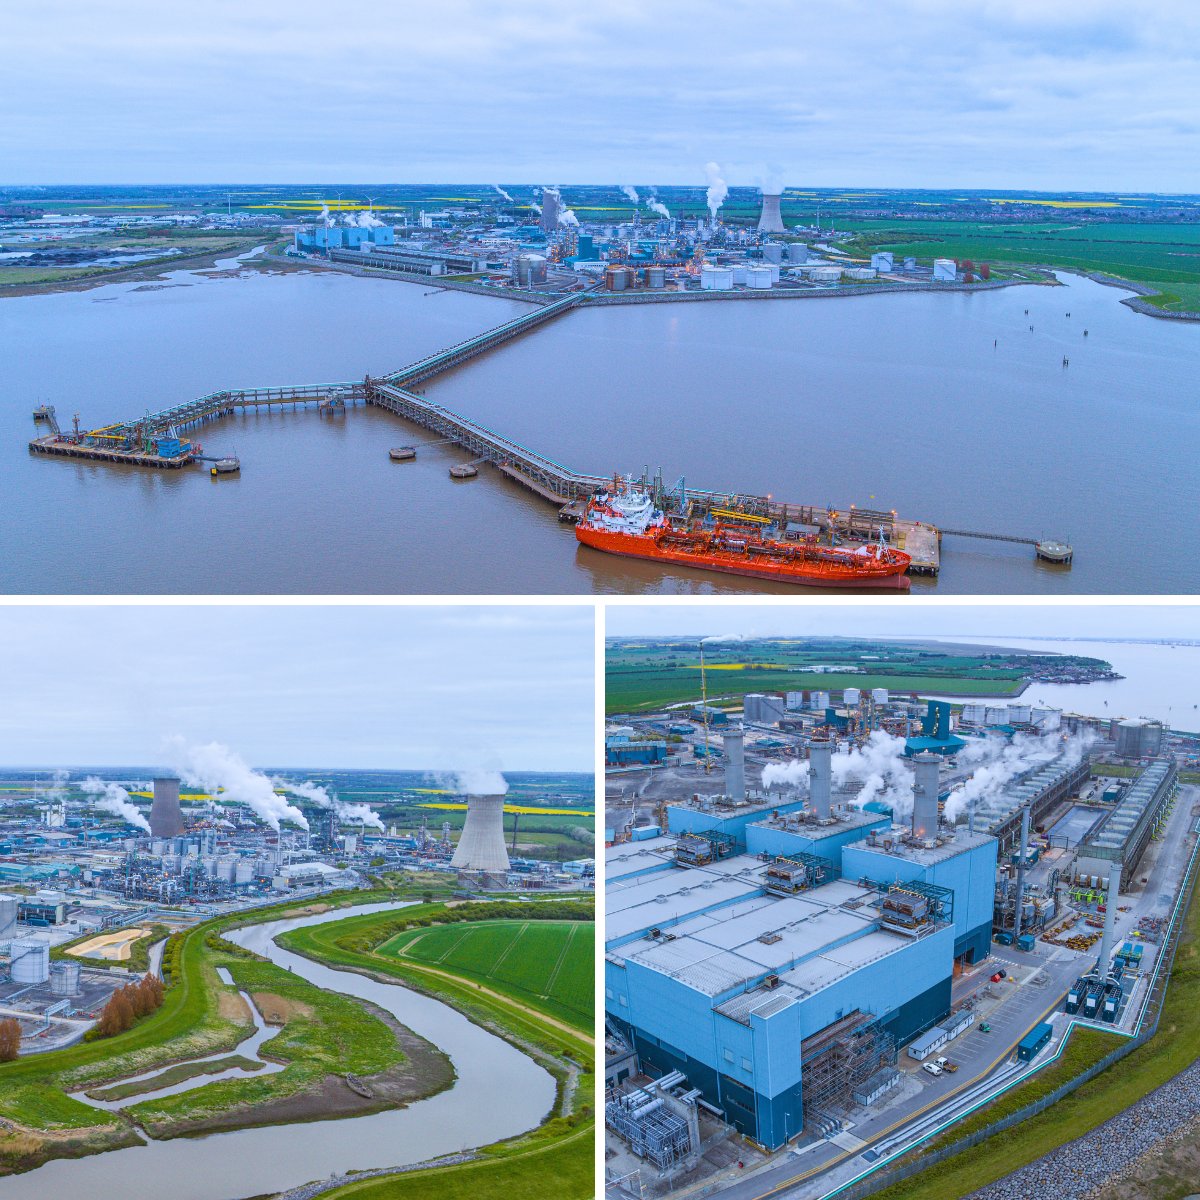 Plans for a hydrogen and carbon capture plant at Saltend Chemicals Park have been approved. The plant, which will be delivered by @Equinor, has been labelled 'one of the UK's key decarbonisation projects.' Read more about it: bbc.in/4bOcR1x Photo credit: Equinor.